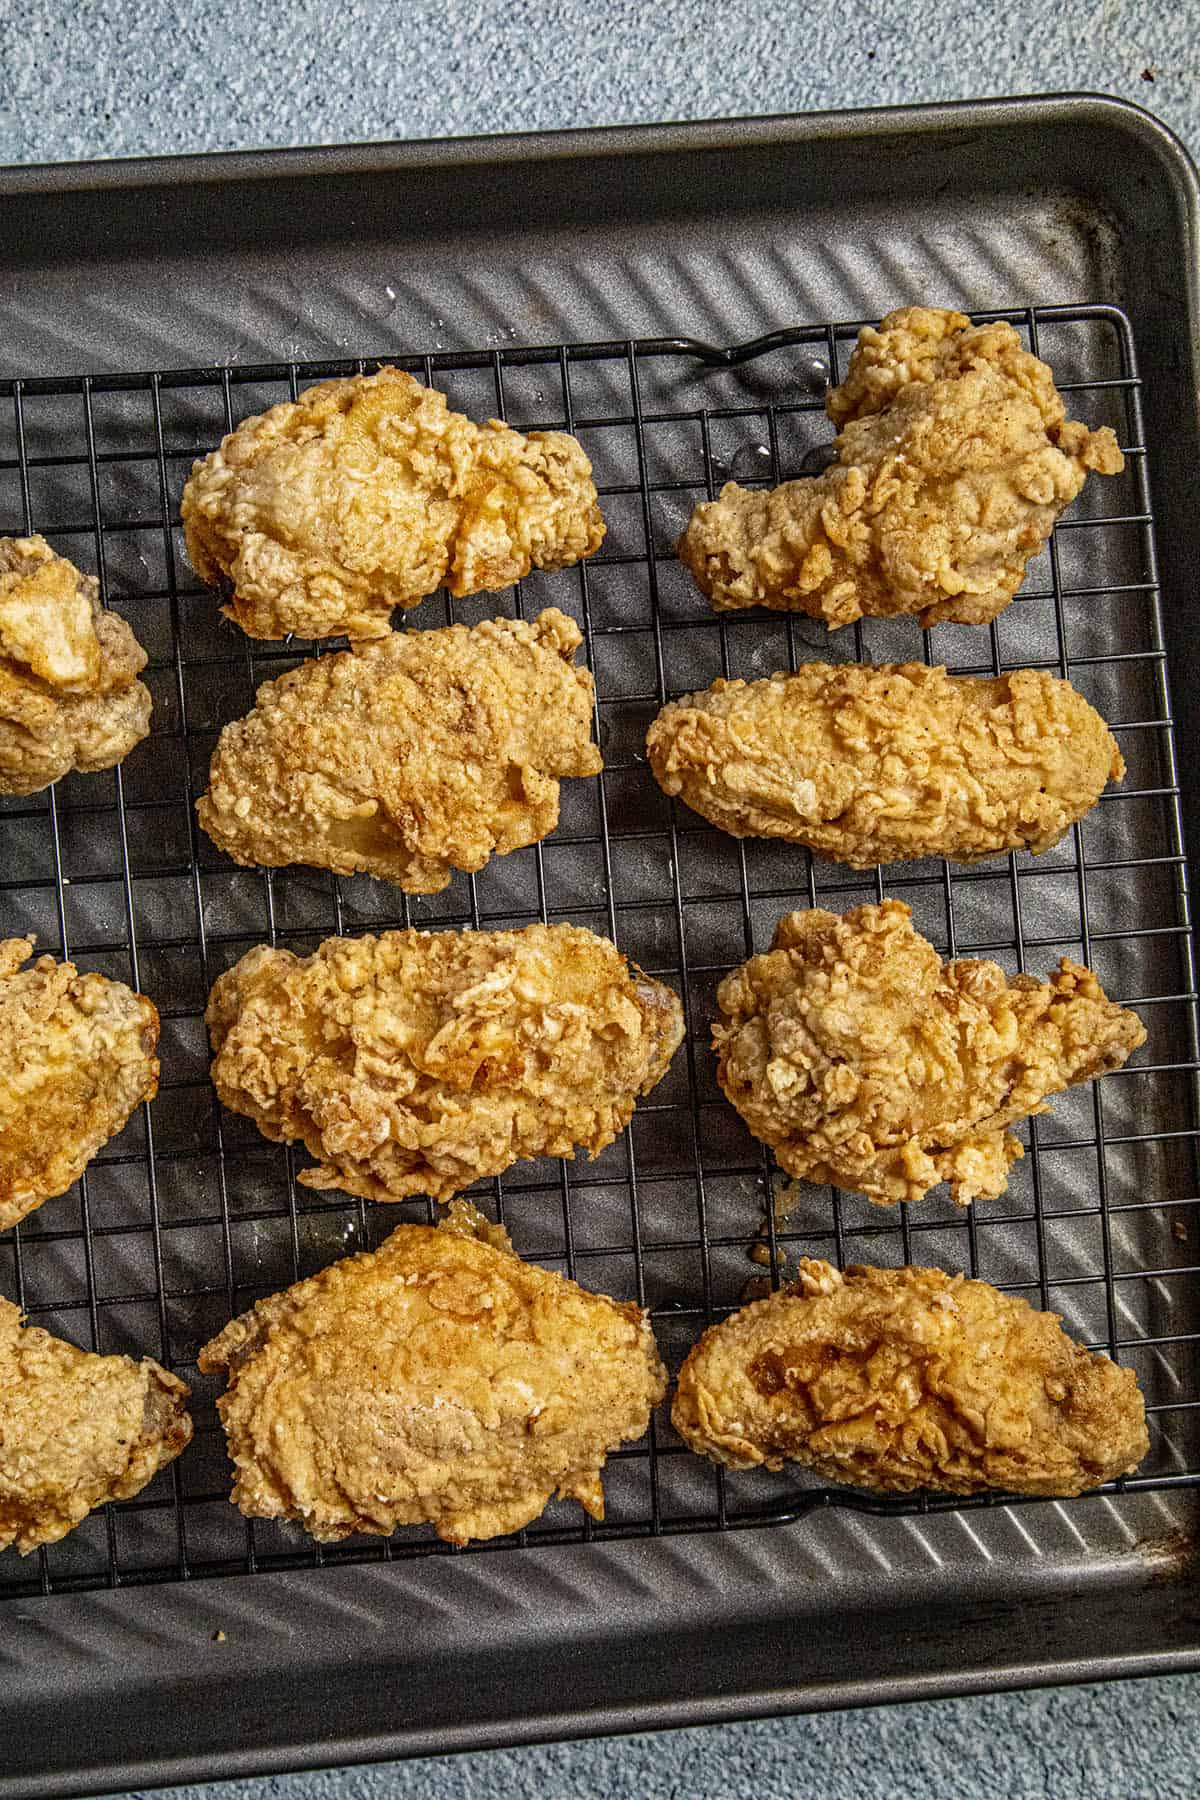 Fried Chicken Wings draining on a wire rack